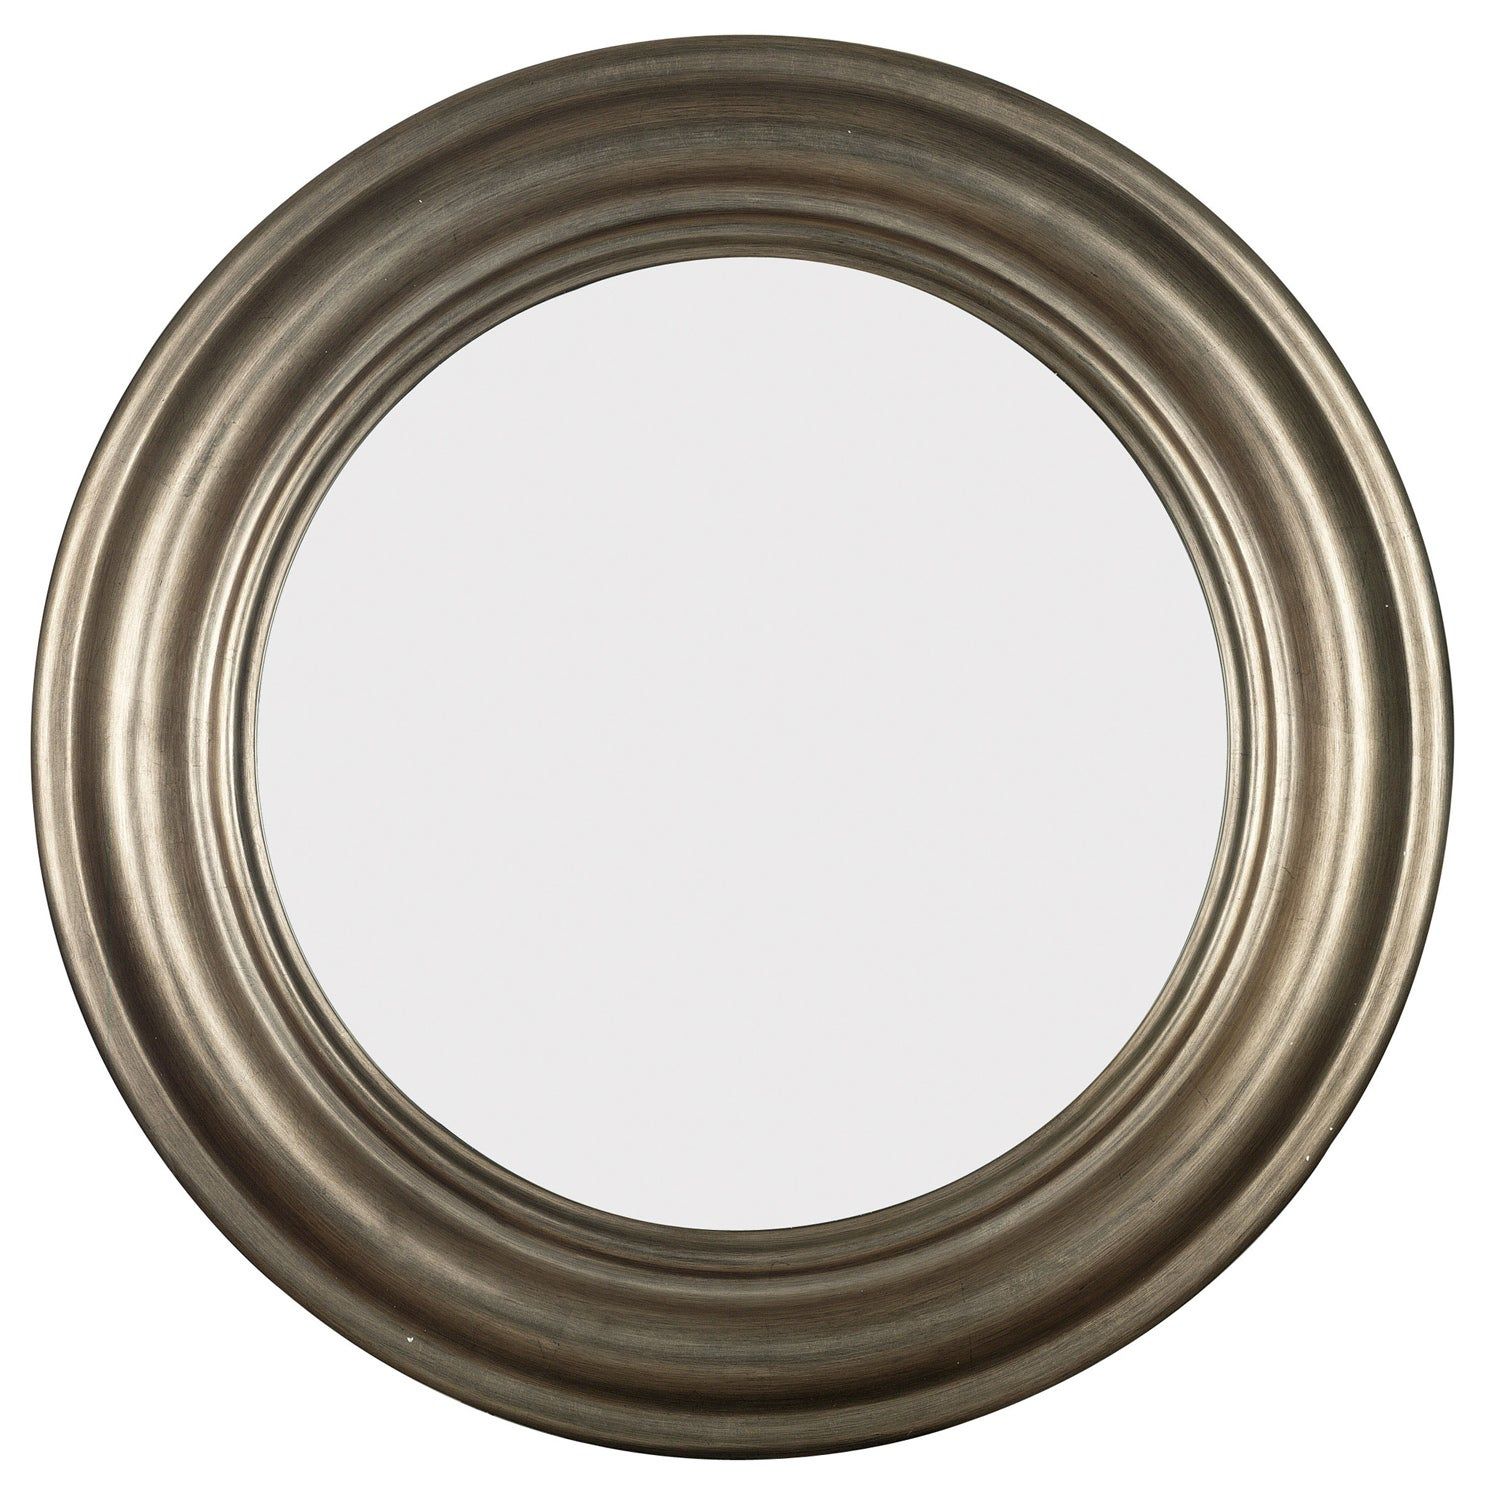 Pasco Round Antique Silver Wall Mirror – 13925218 – Overstock With Silver Leaf Round Wall Mirrors (View 14 of 15)